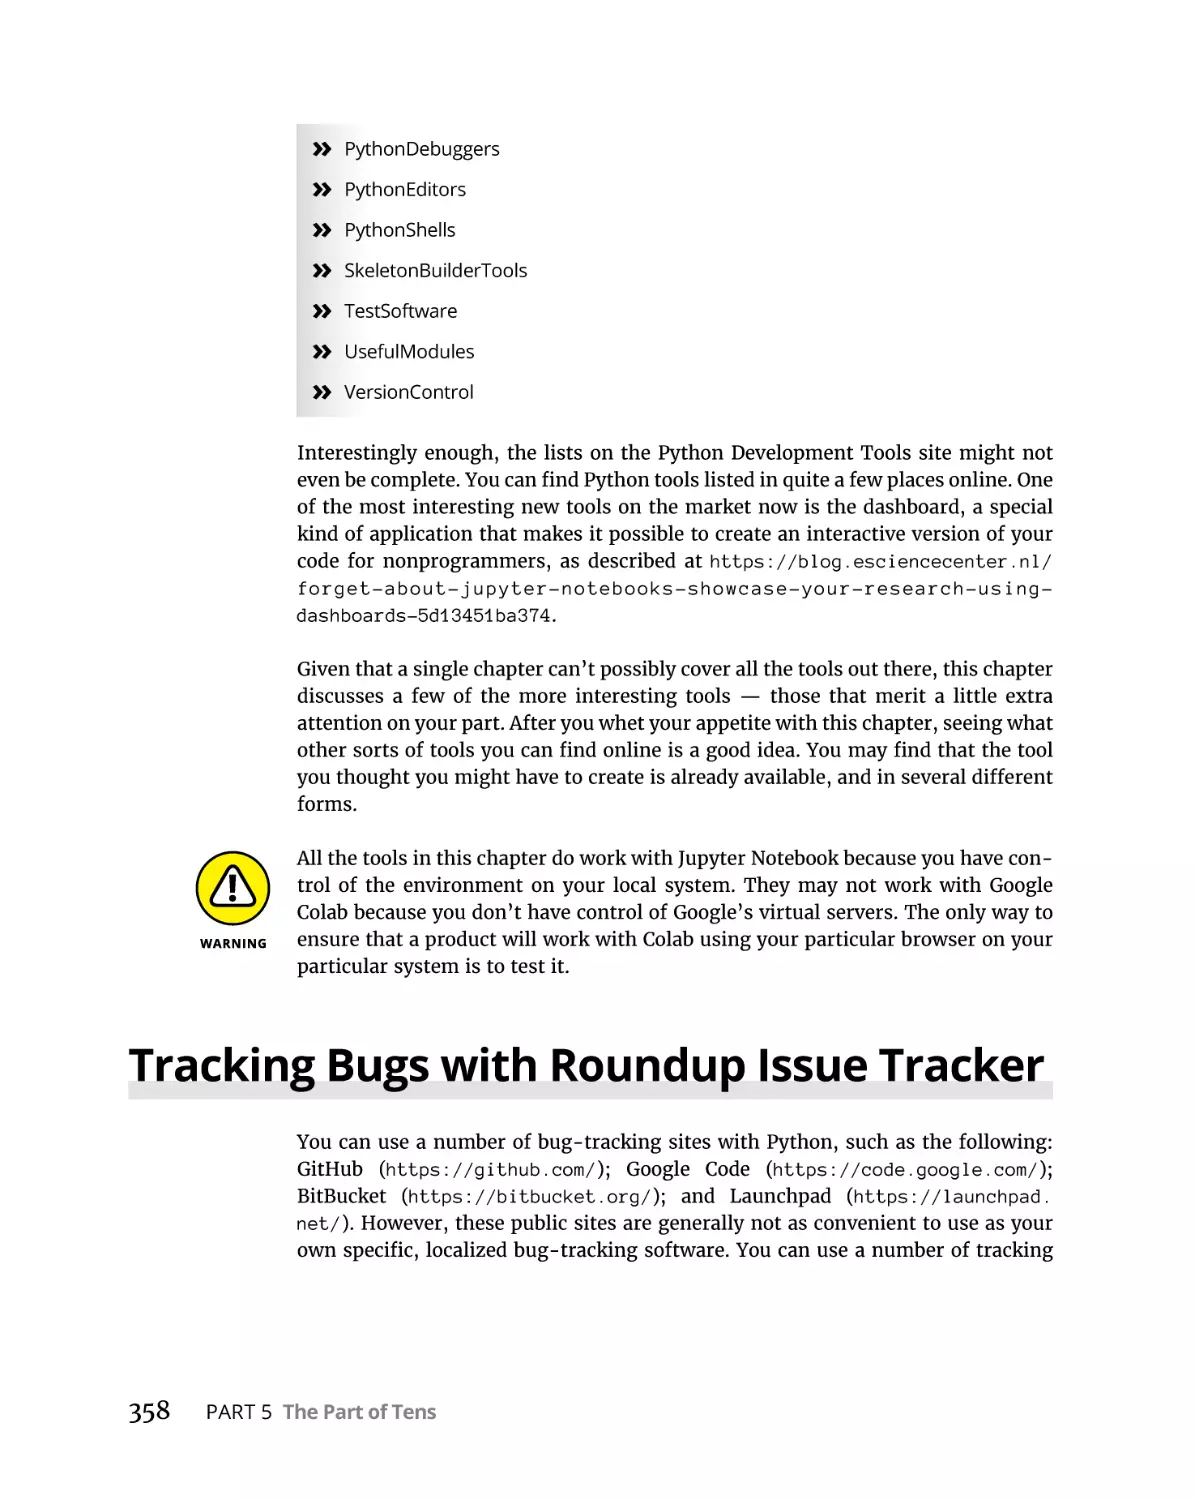 Tracking Bugs with Roundup Issue Tracker